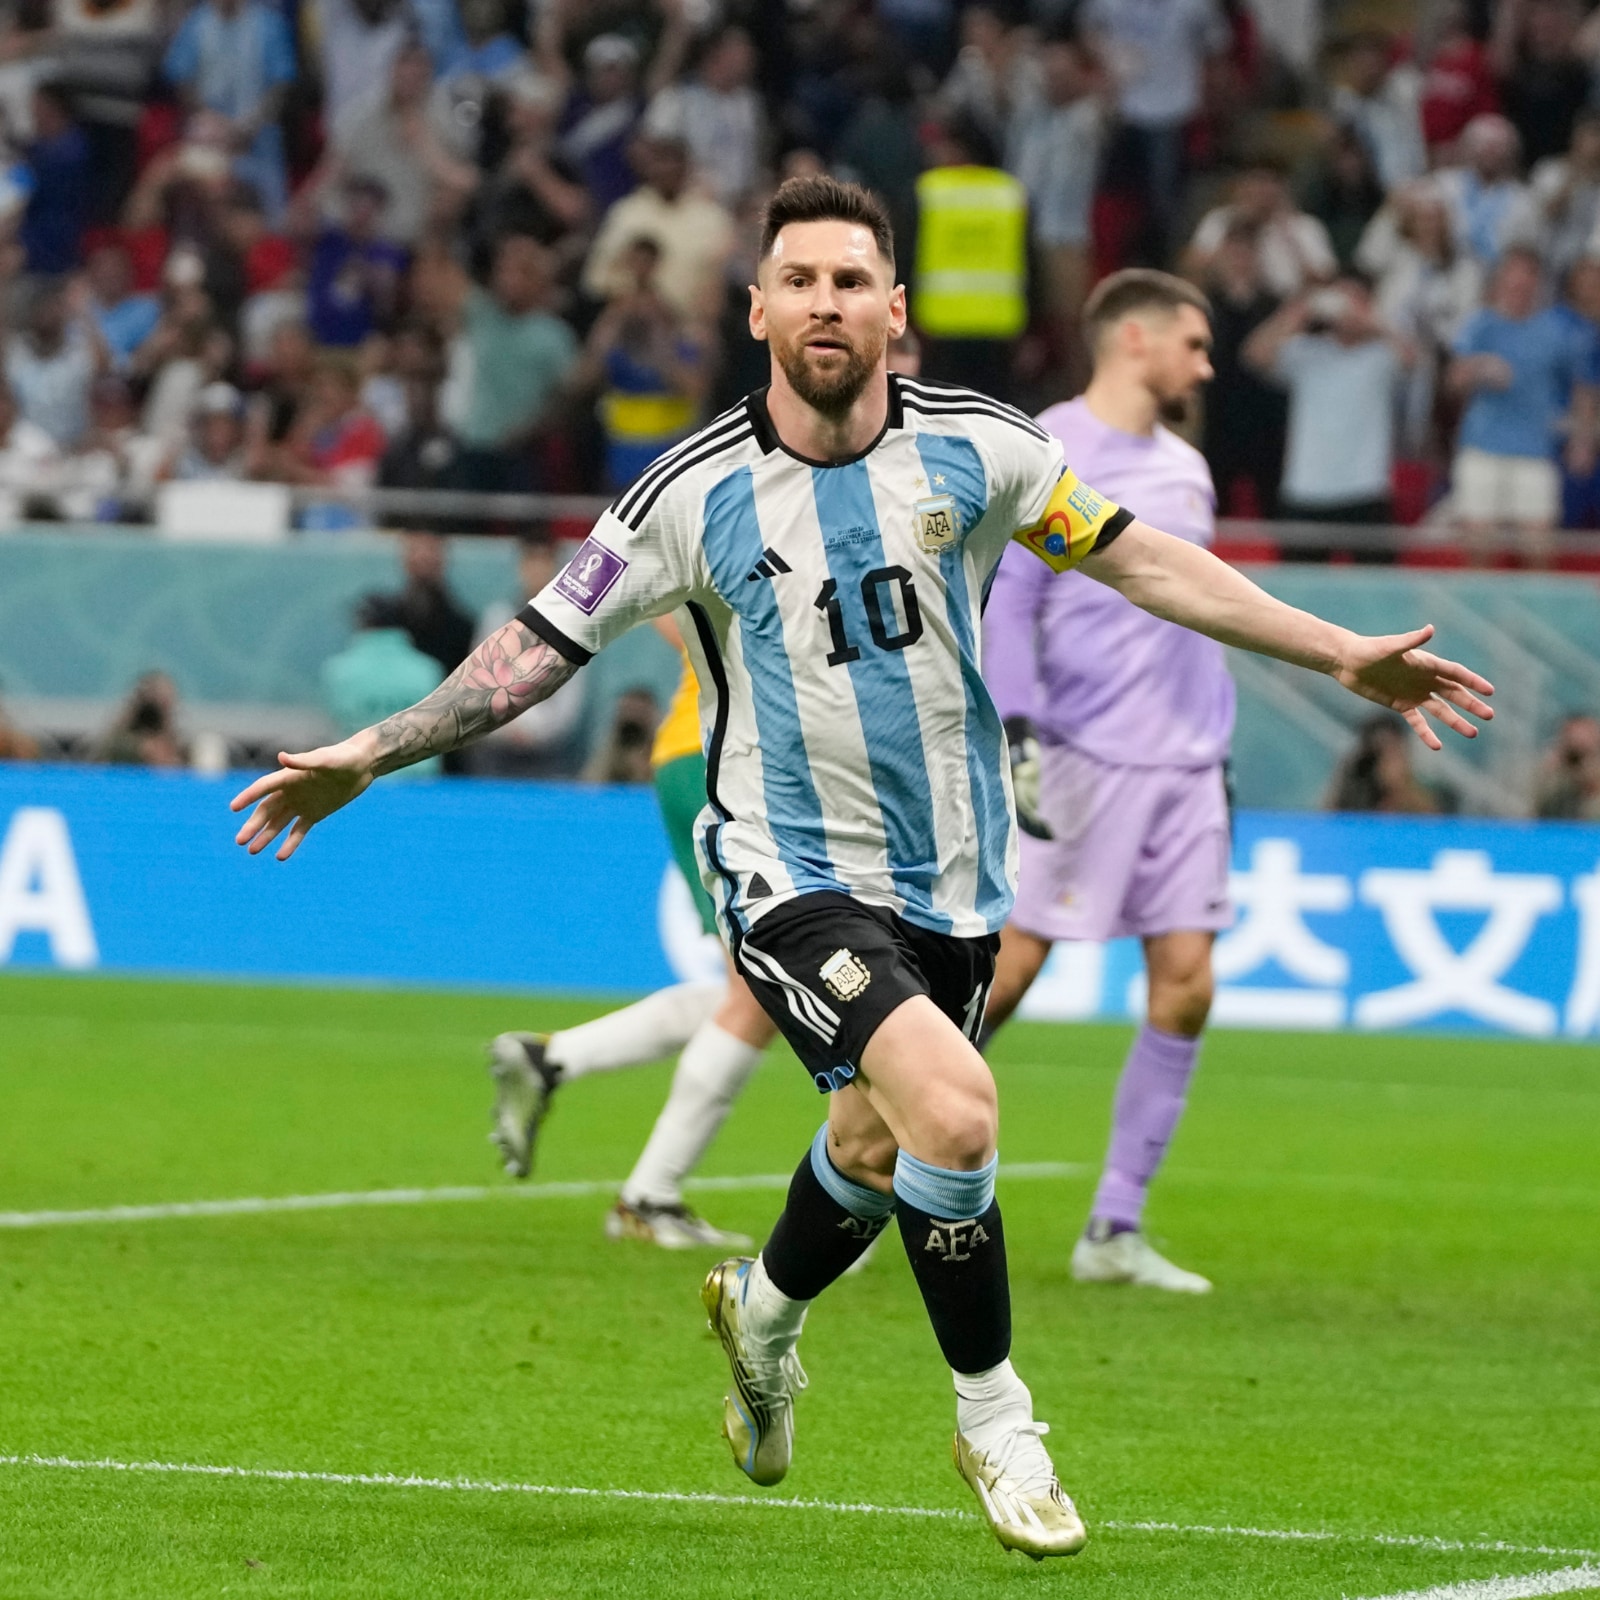 Wallpaper Flag Victory Argentina Lionel Messi Lionel Messi Messi Joy  World Cup Messi The world Cup FIFA World Cup World Cup 2022 The FIFA  world Cup Captain of the Argentine national team